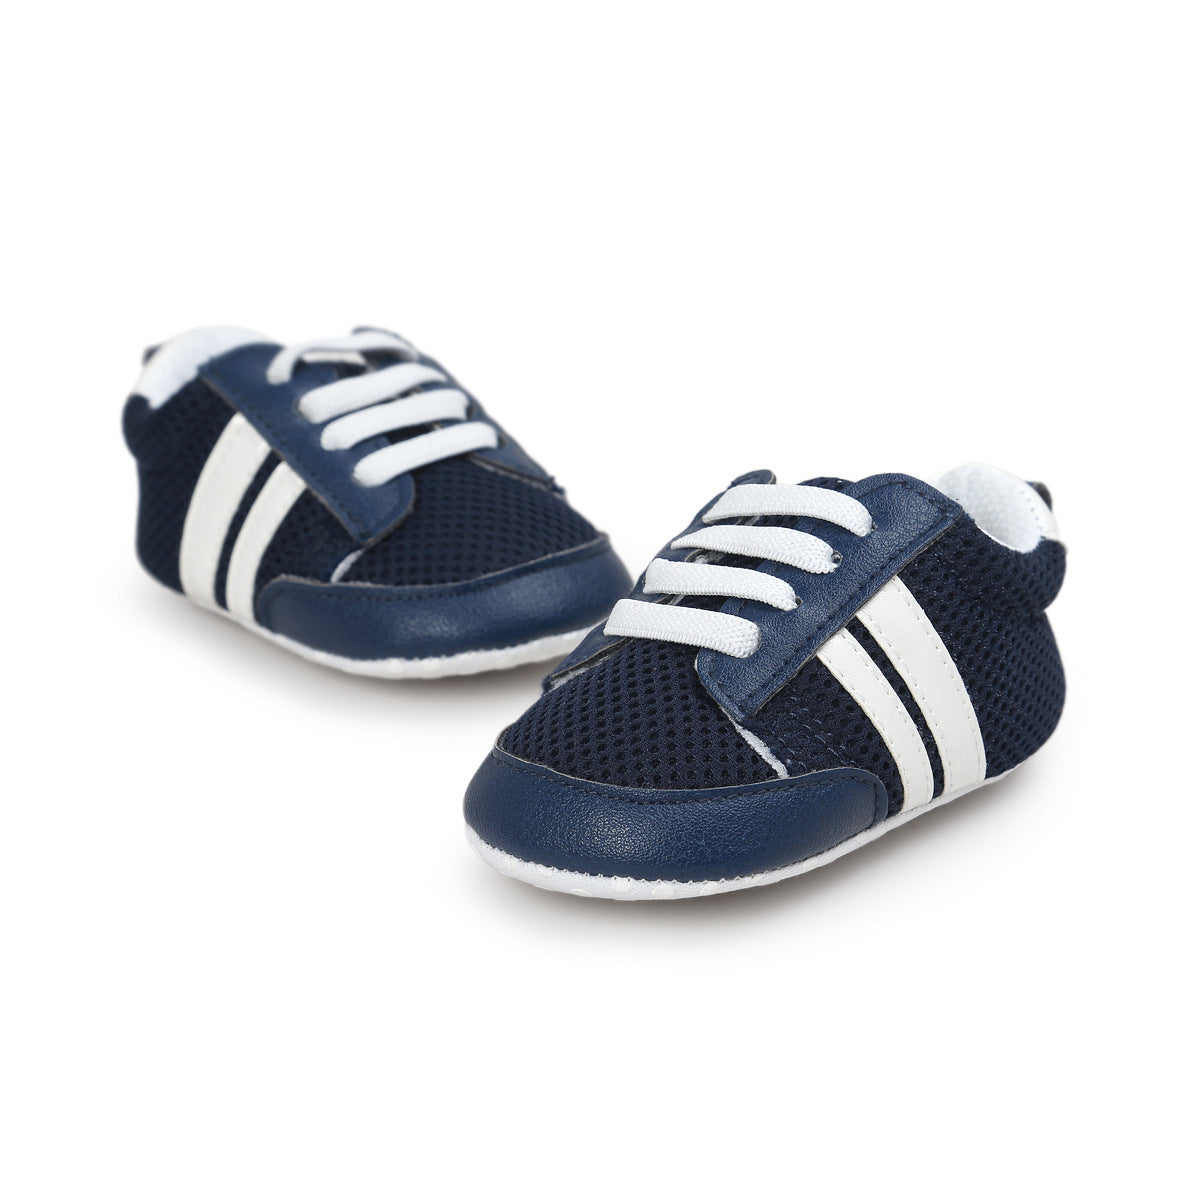 Baby Boy or Girl Moccasins Non-Slip Shoes